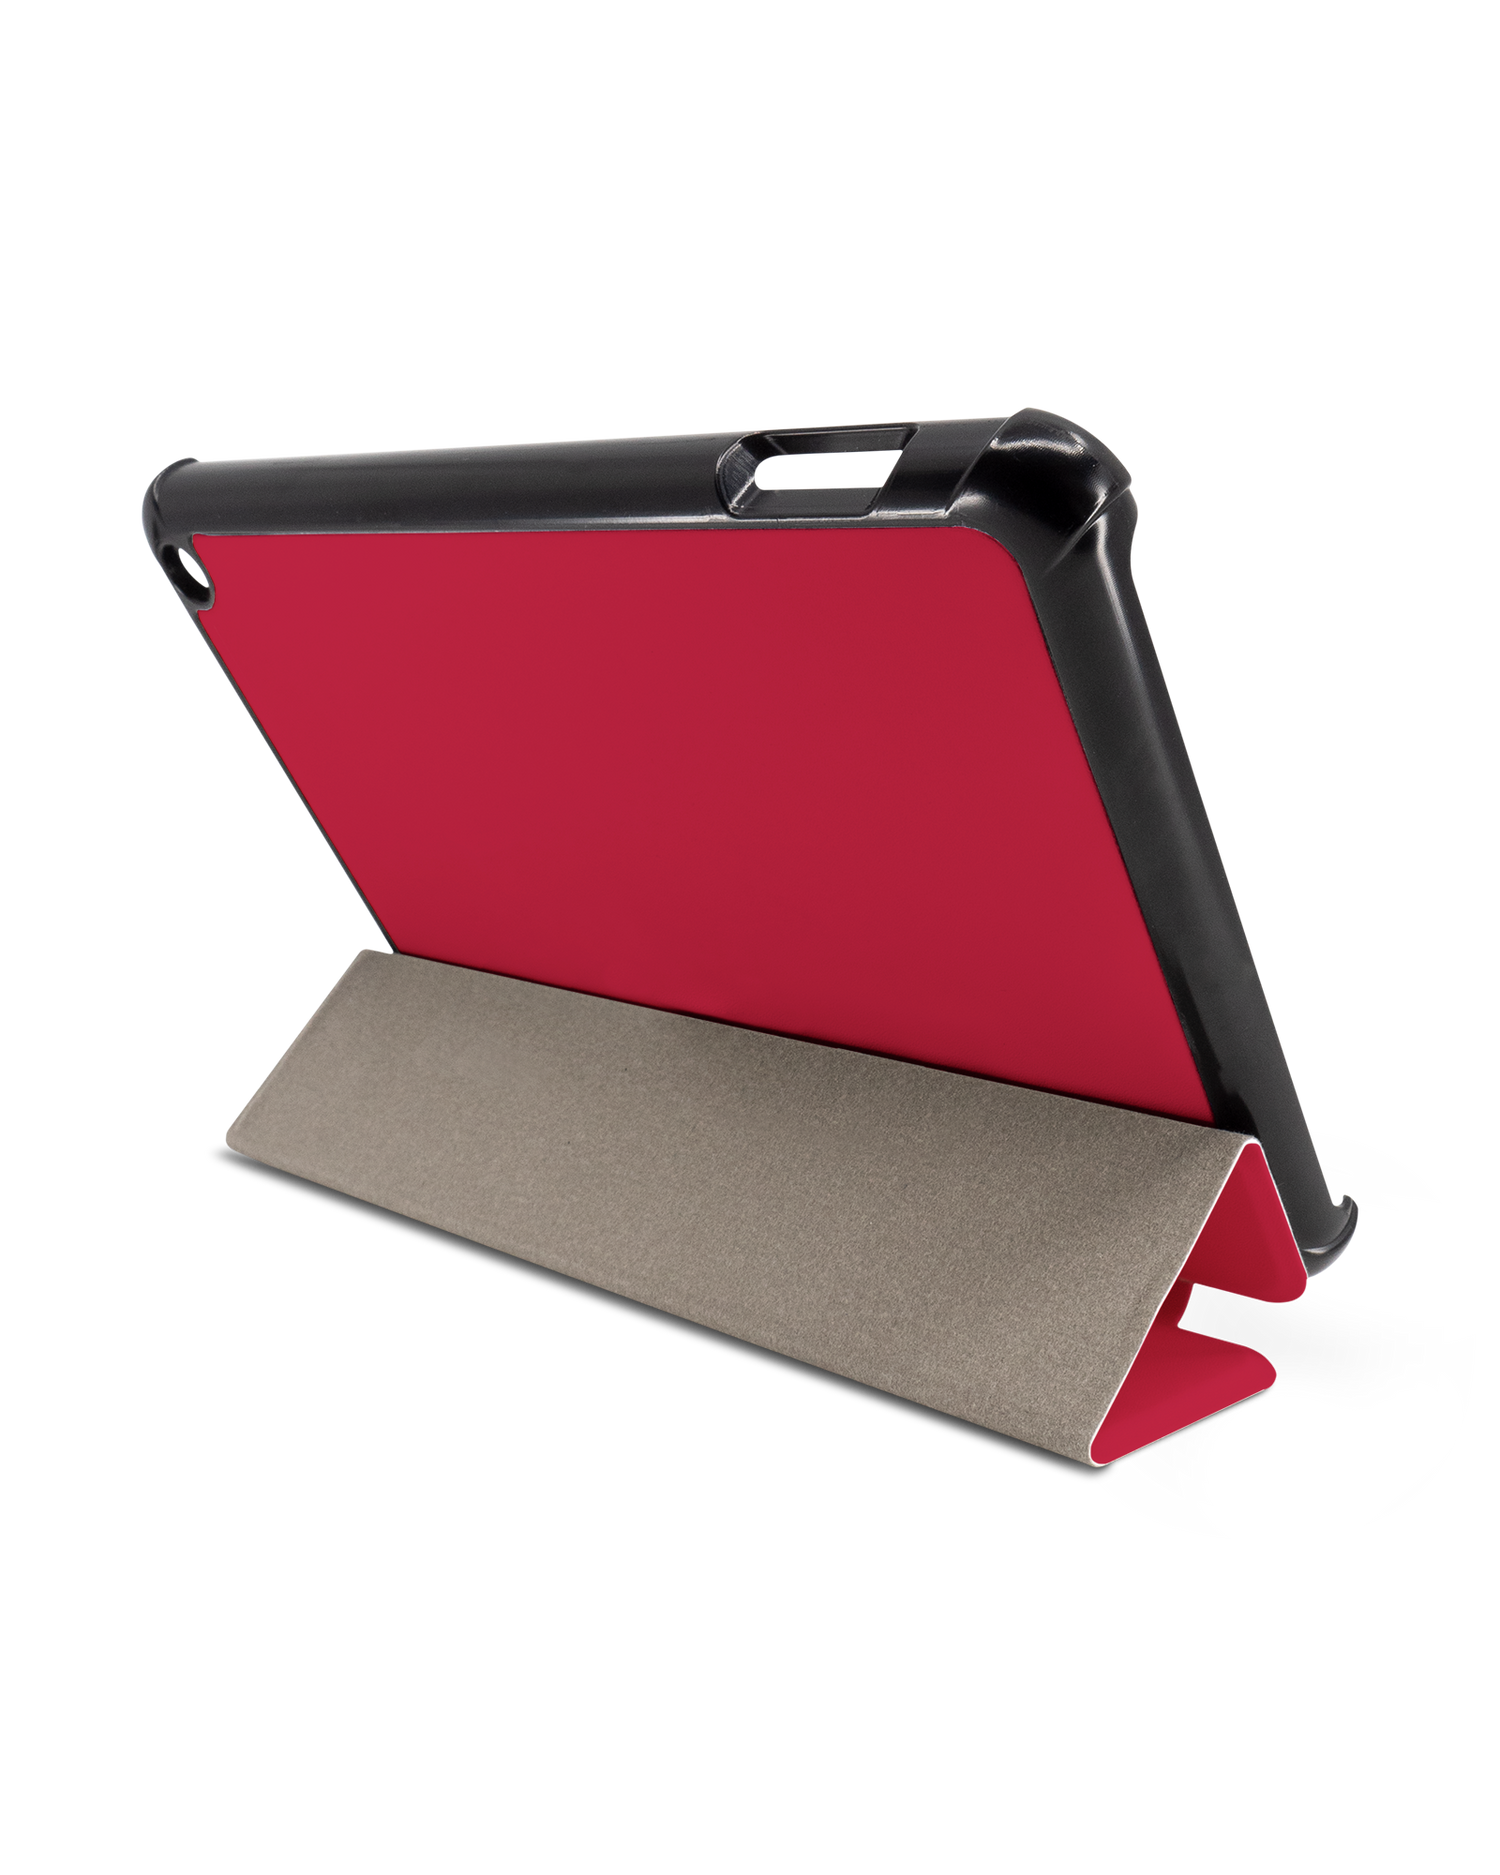 RED Tablet Smart Case for Amazon Fire 7 (2022): Used as Stand